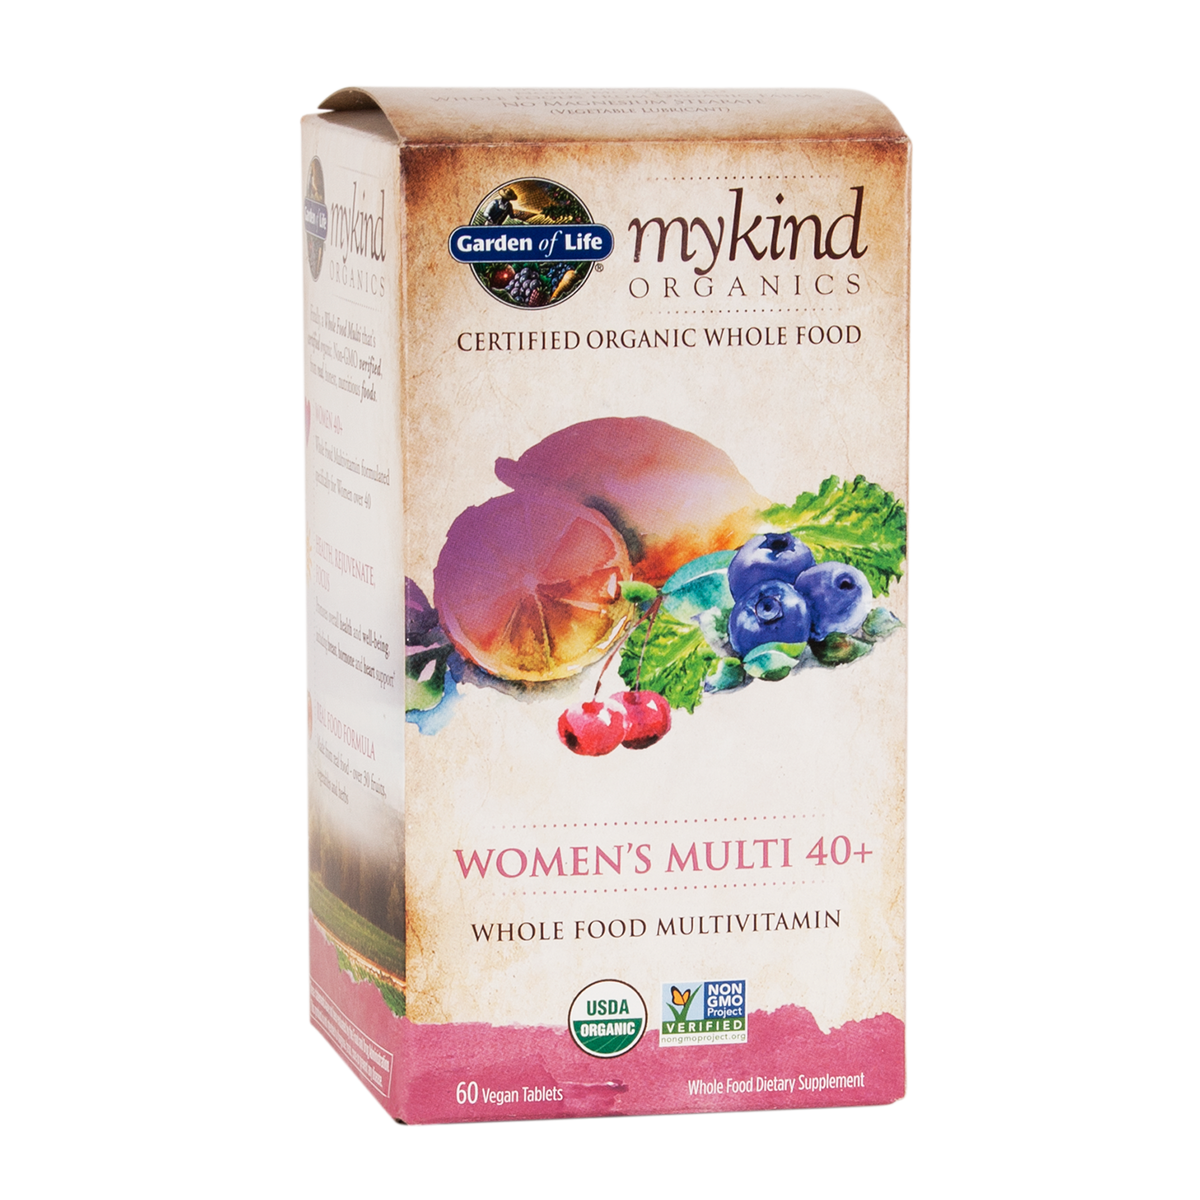 myKind Vegan Organic Women&#39;s Multi 40+ Tablets | Garden of Life | Raw Living UK | Supplements | Multi Vitamins | myKind Organics Women’s Multi 40+ is a supplement is for women over 40. Made with organic foods &amp; herbs, 2 tablets daily provide essential vitamins &amp; minerals.